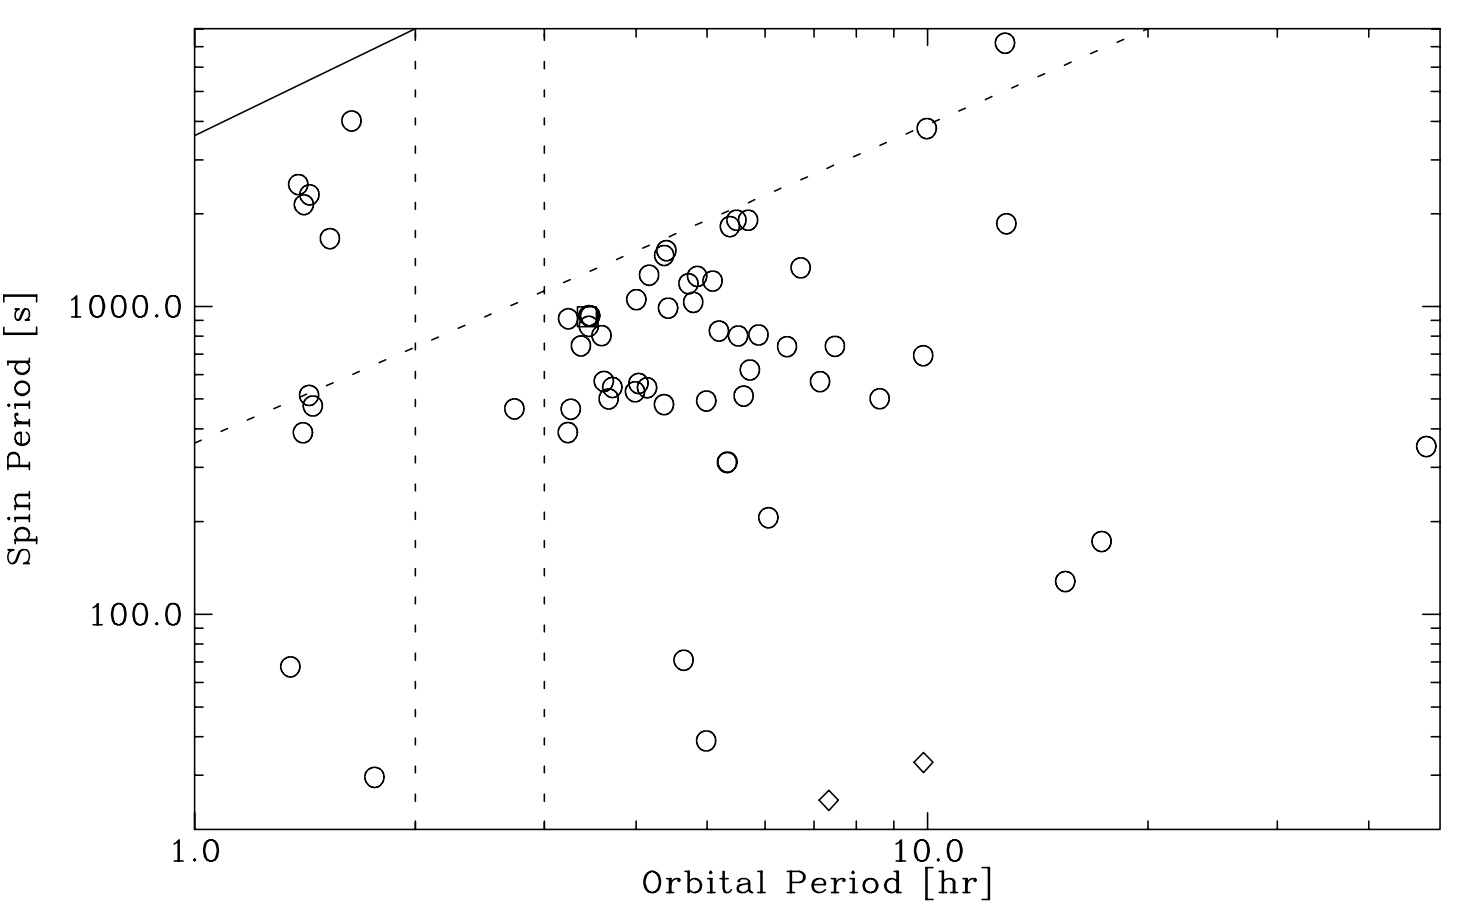 Graph of orbital period plotted against spin period for 64
          Intermediate Polars